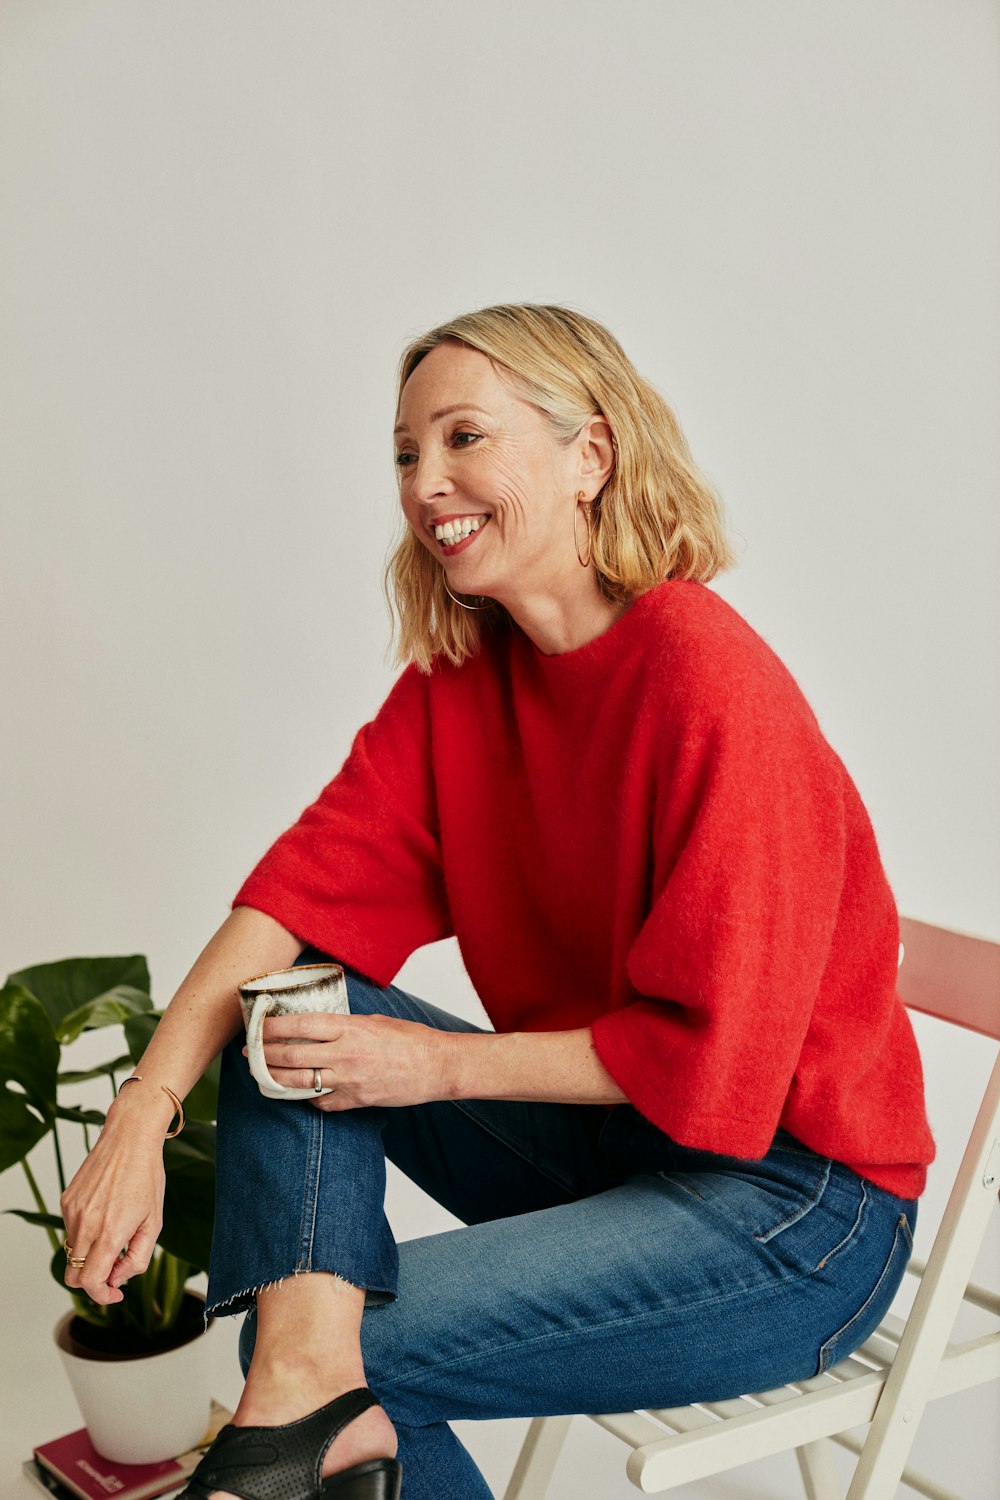 a woman in a red sweater and jeans sitting on a chair